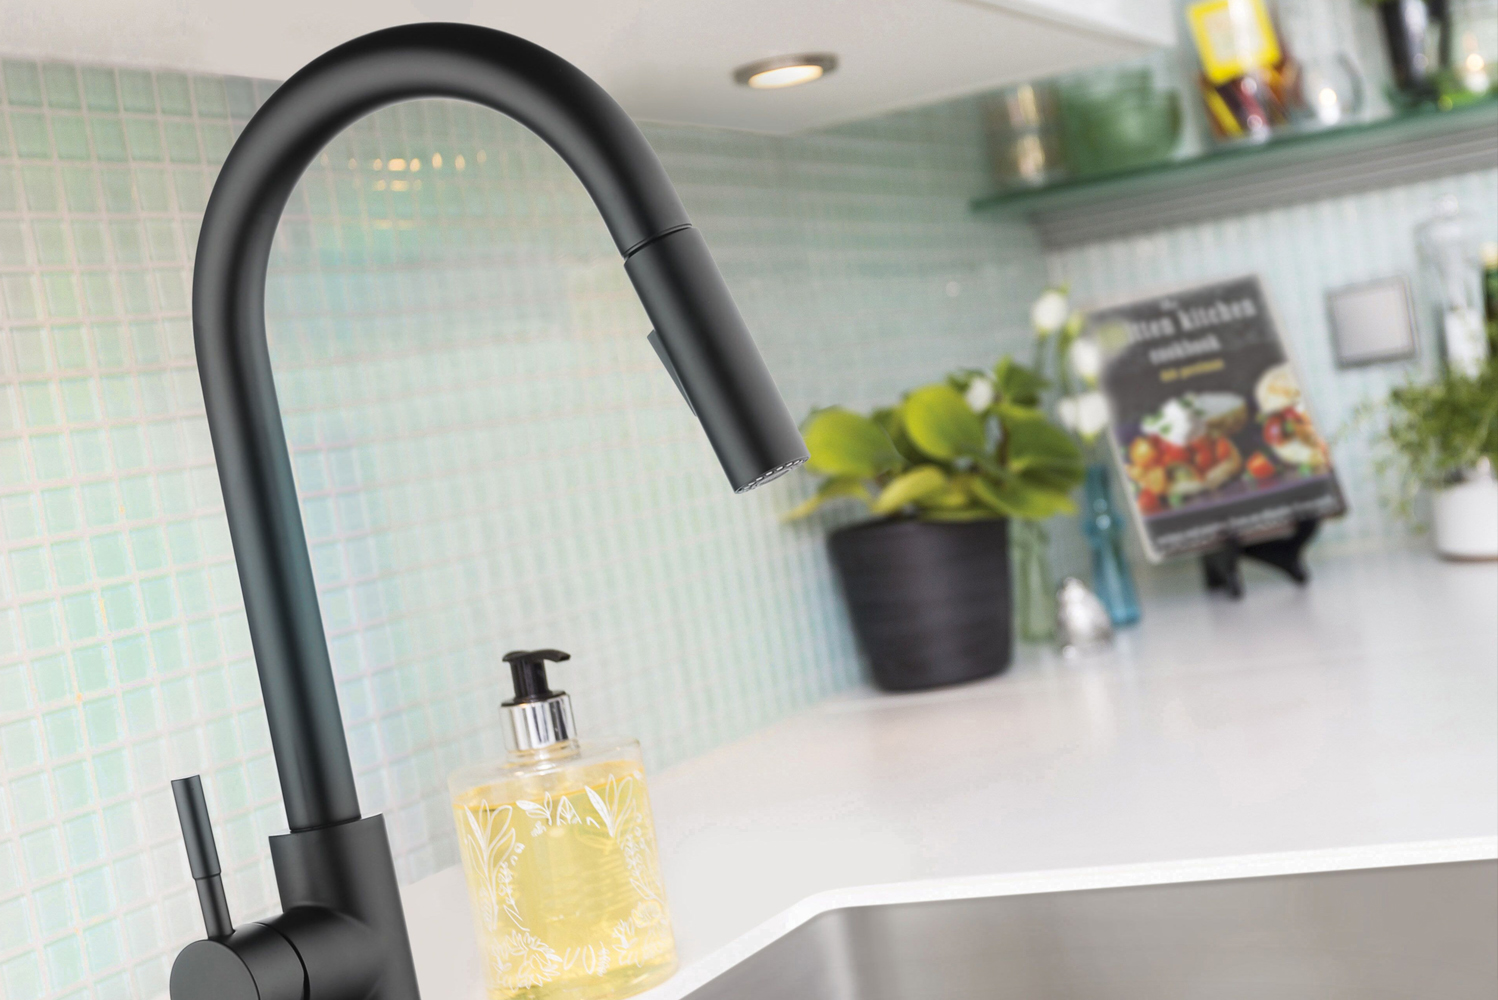 Lenova launched two new faucets 